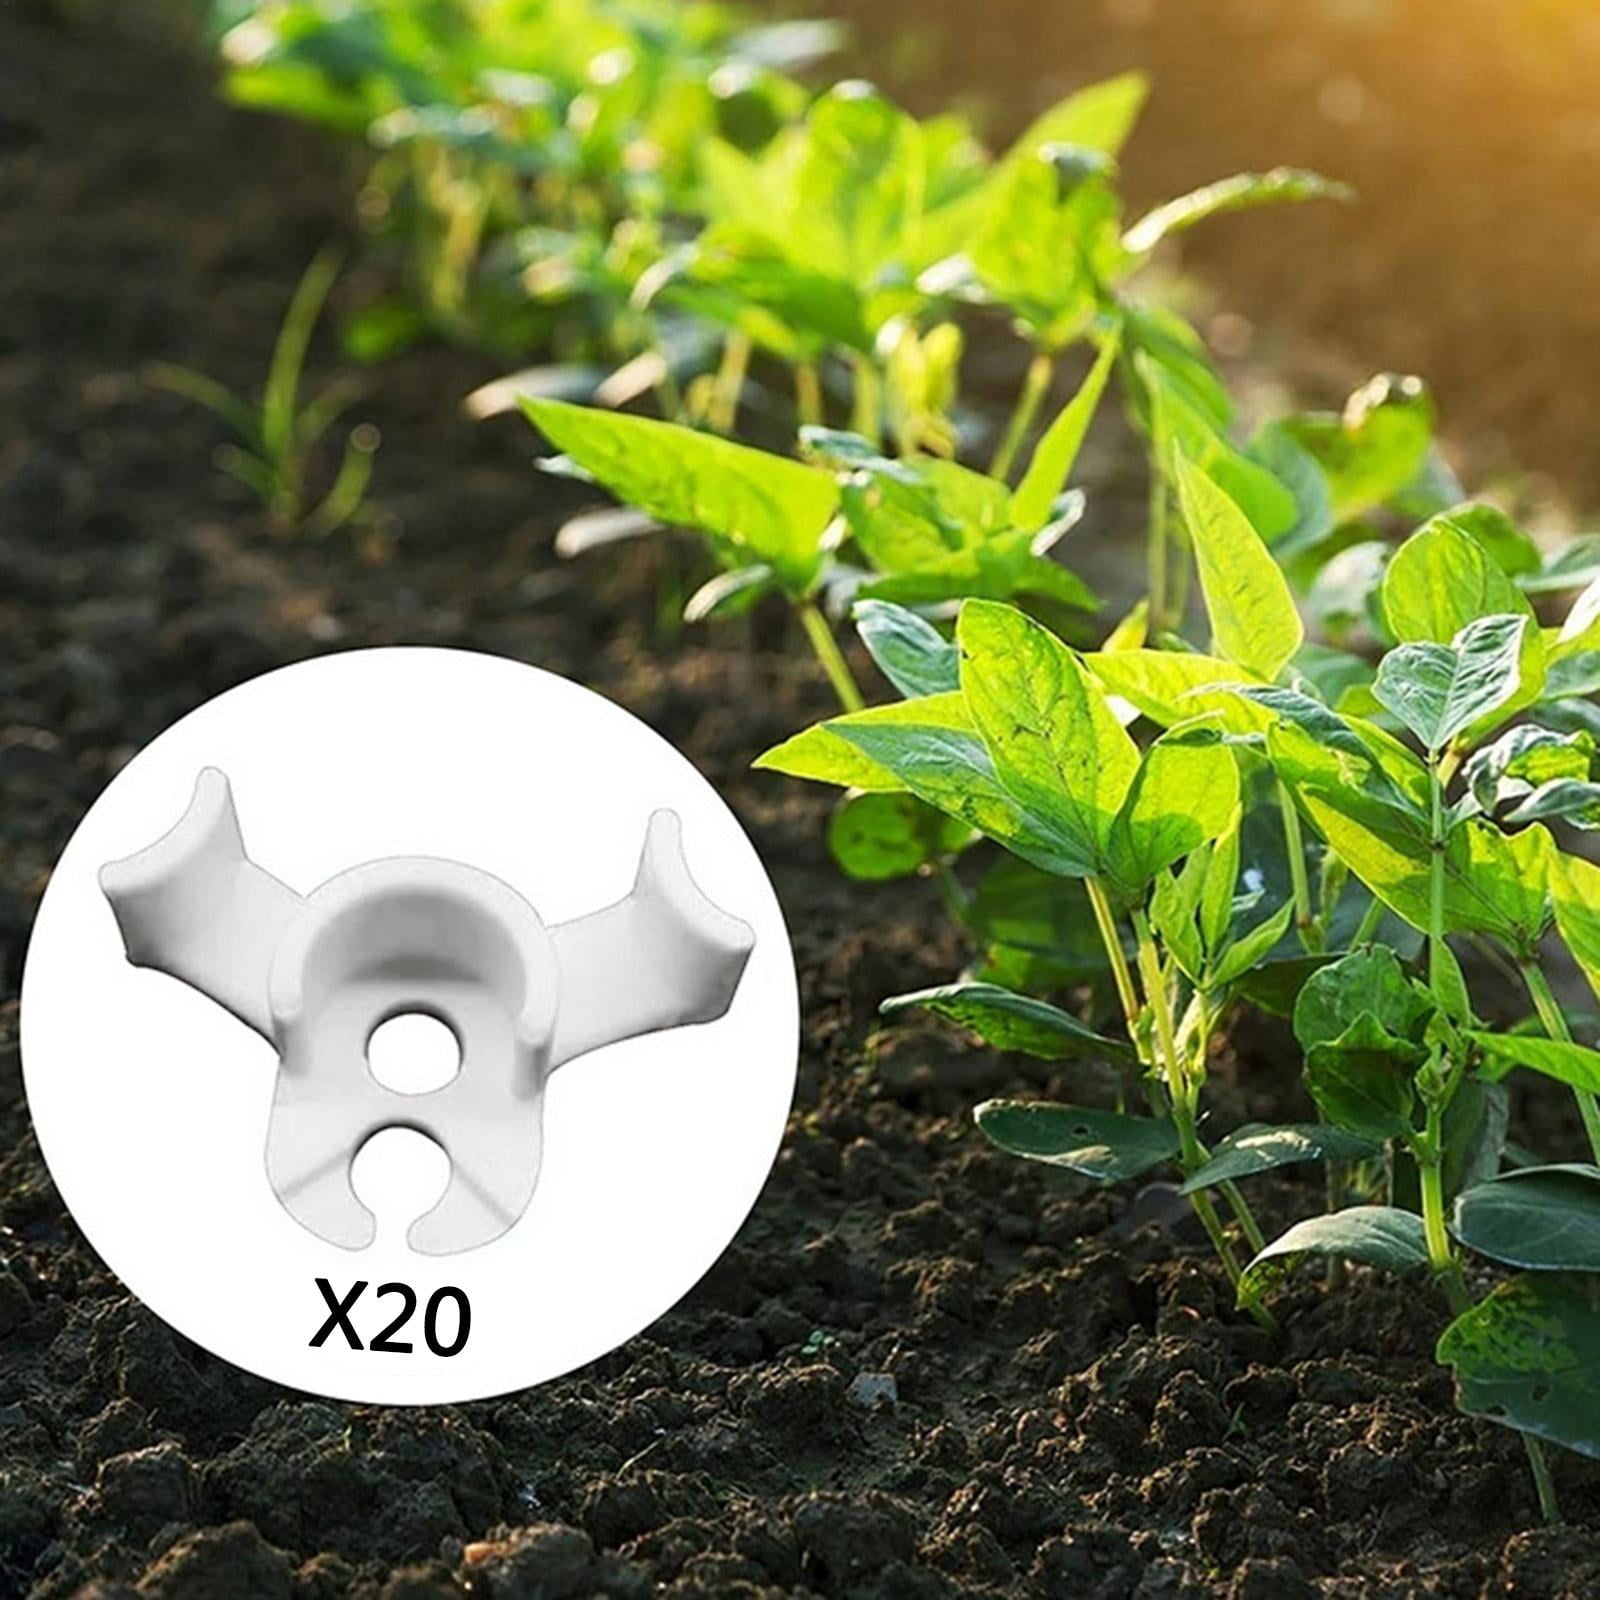 90 Degree Plant Bender Elbow Tomato Clips for Low Stress Training Plants Trainer 